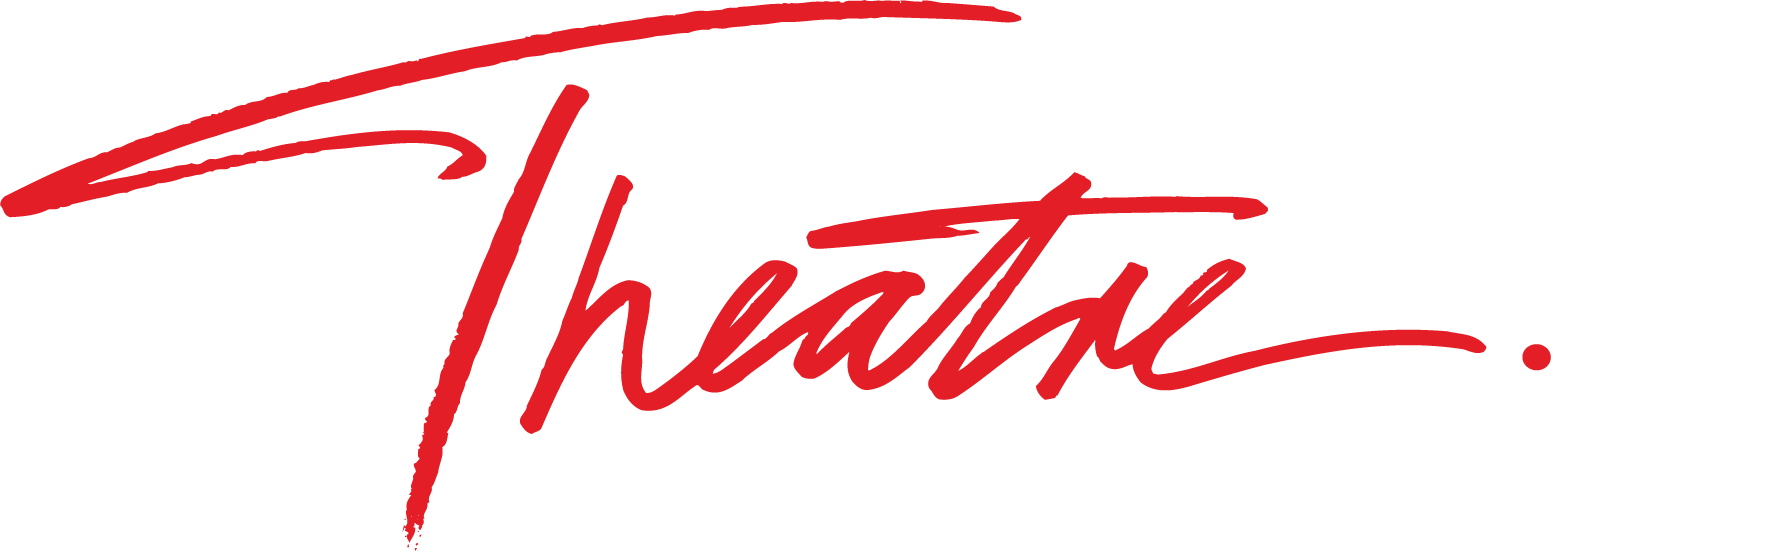 Logo Lawson Field red.png